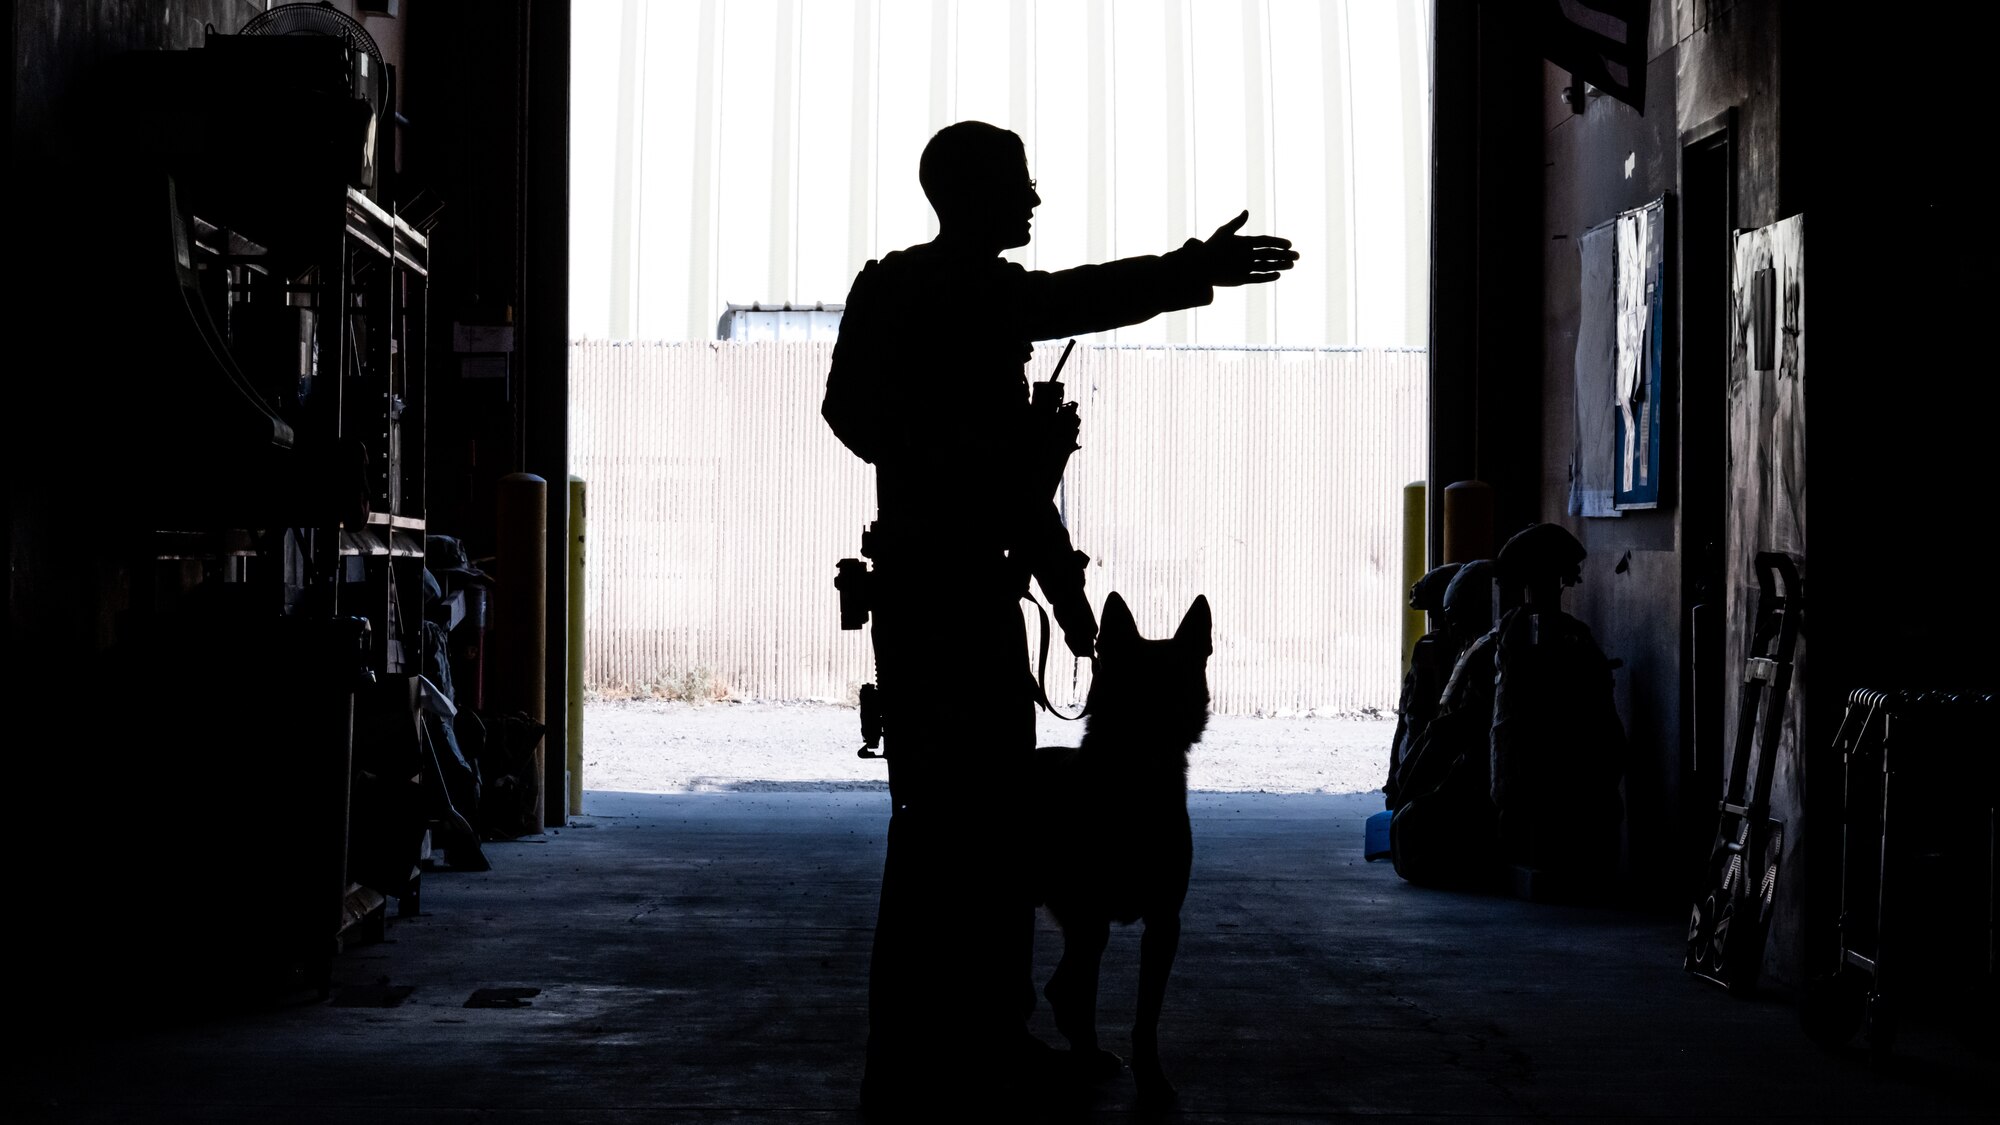 U.S. Air Force military working dog Lucky, Staff Sgt. Kyle Dean, 386th Expeditionary Security Forces Squadron MWD handler, search a warehouse for potential explosives during a training event at Ali Al Salem Air Base, Kuwait, Sept. 14, 2023. MWD handlers and their loyal K-9 partners make up a highly trained law enforcement team capable of critical drug and explosives detection skills that protect the installation. (U.S. Air Force photo by Staff Sgt. Kevin Long)